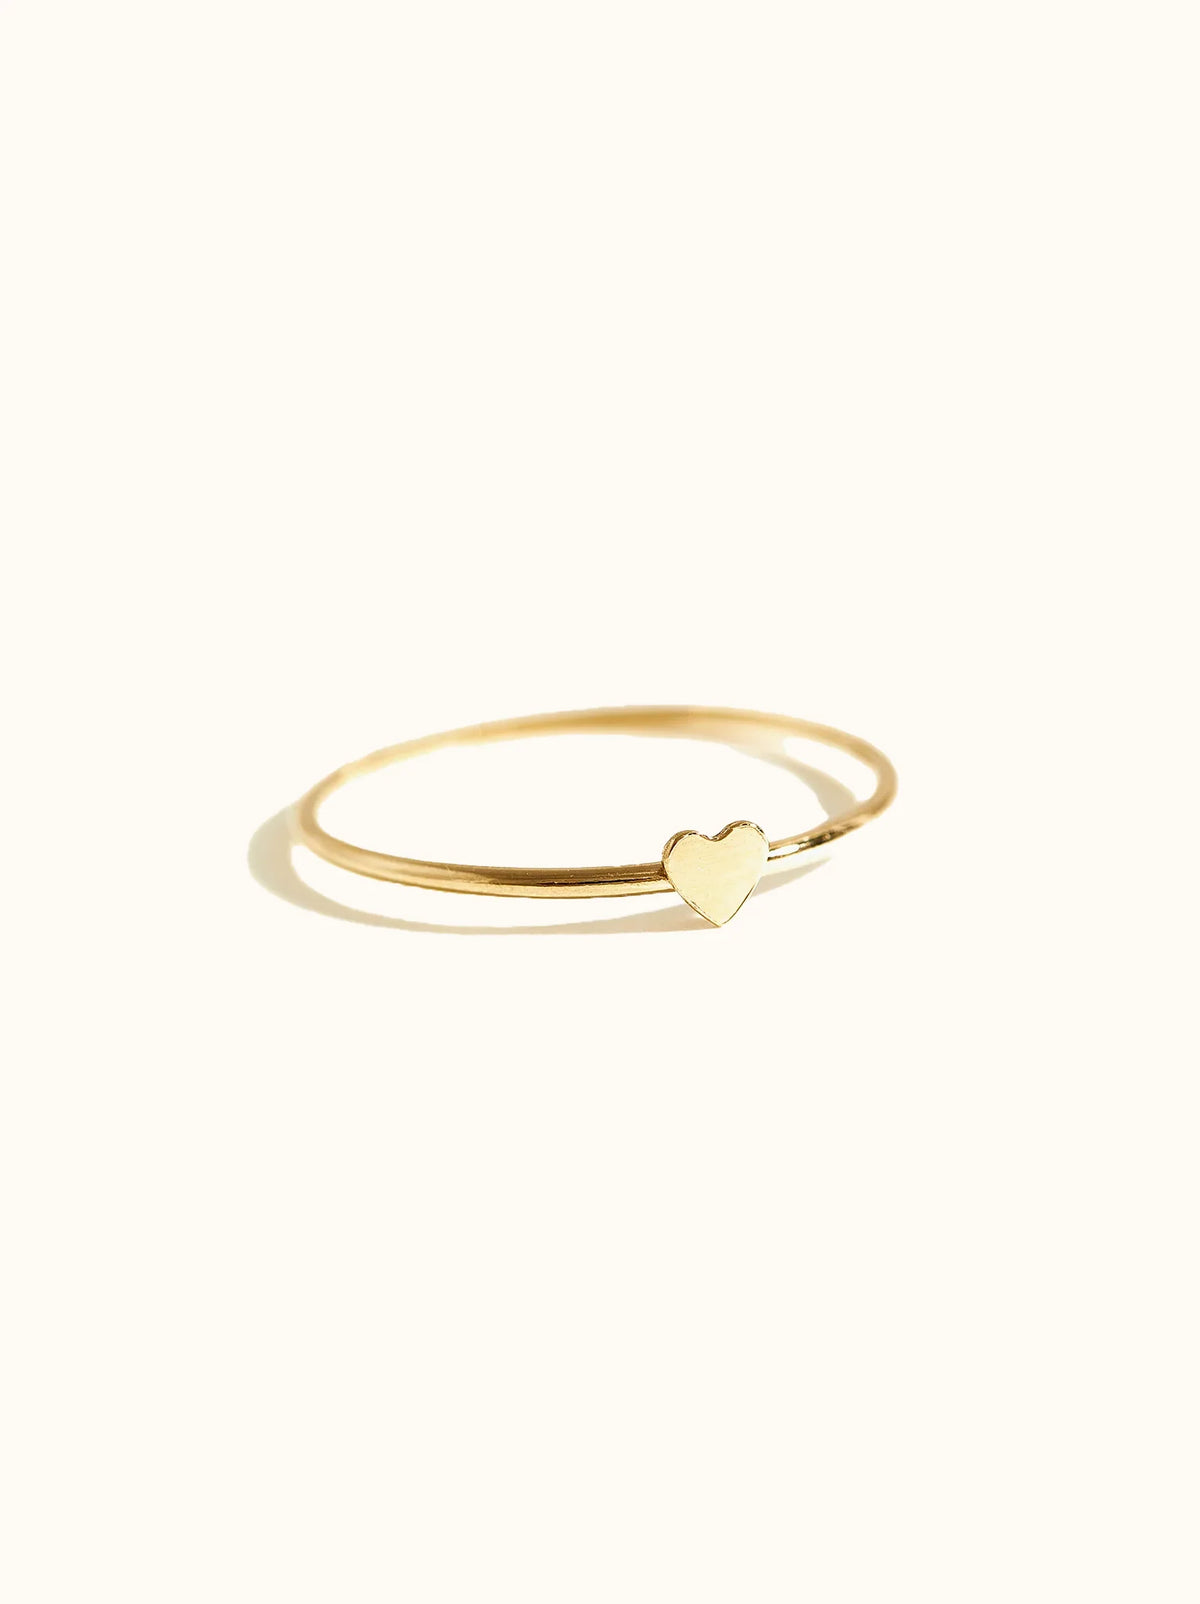 ABLE heart stacking ring in 14k gold fill